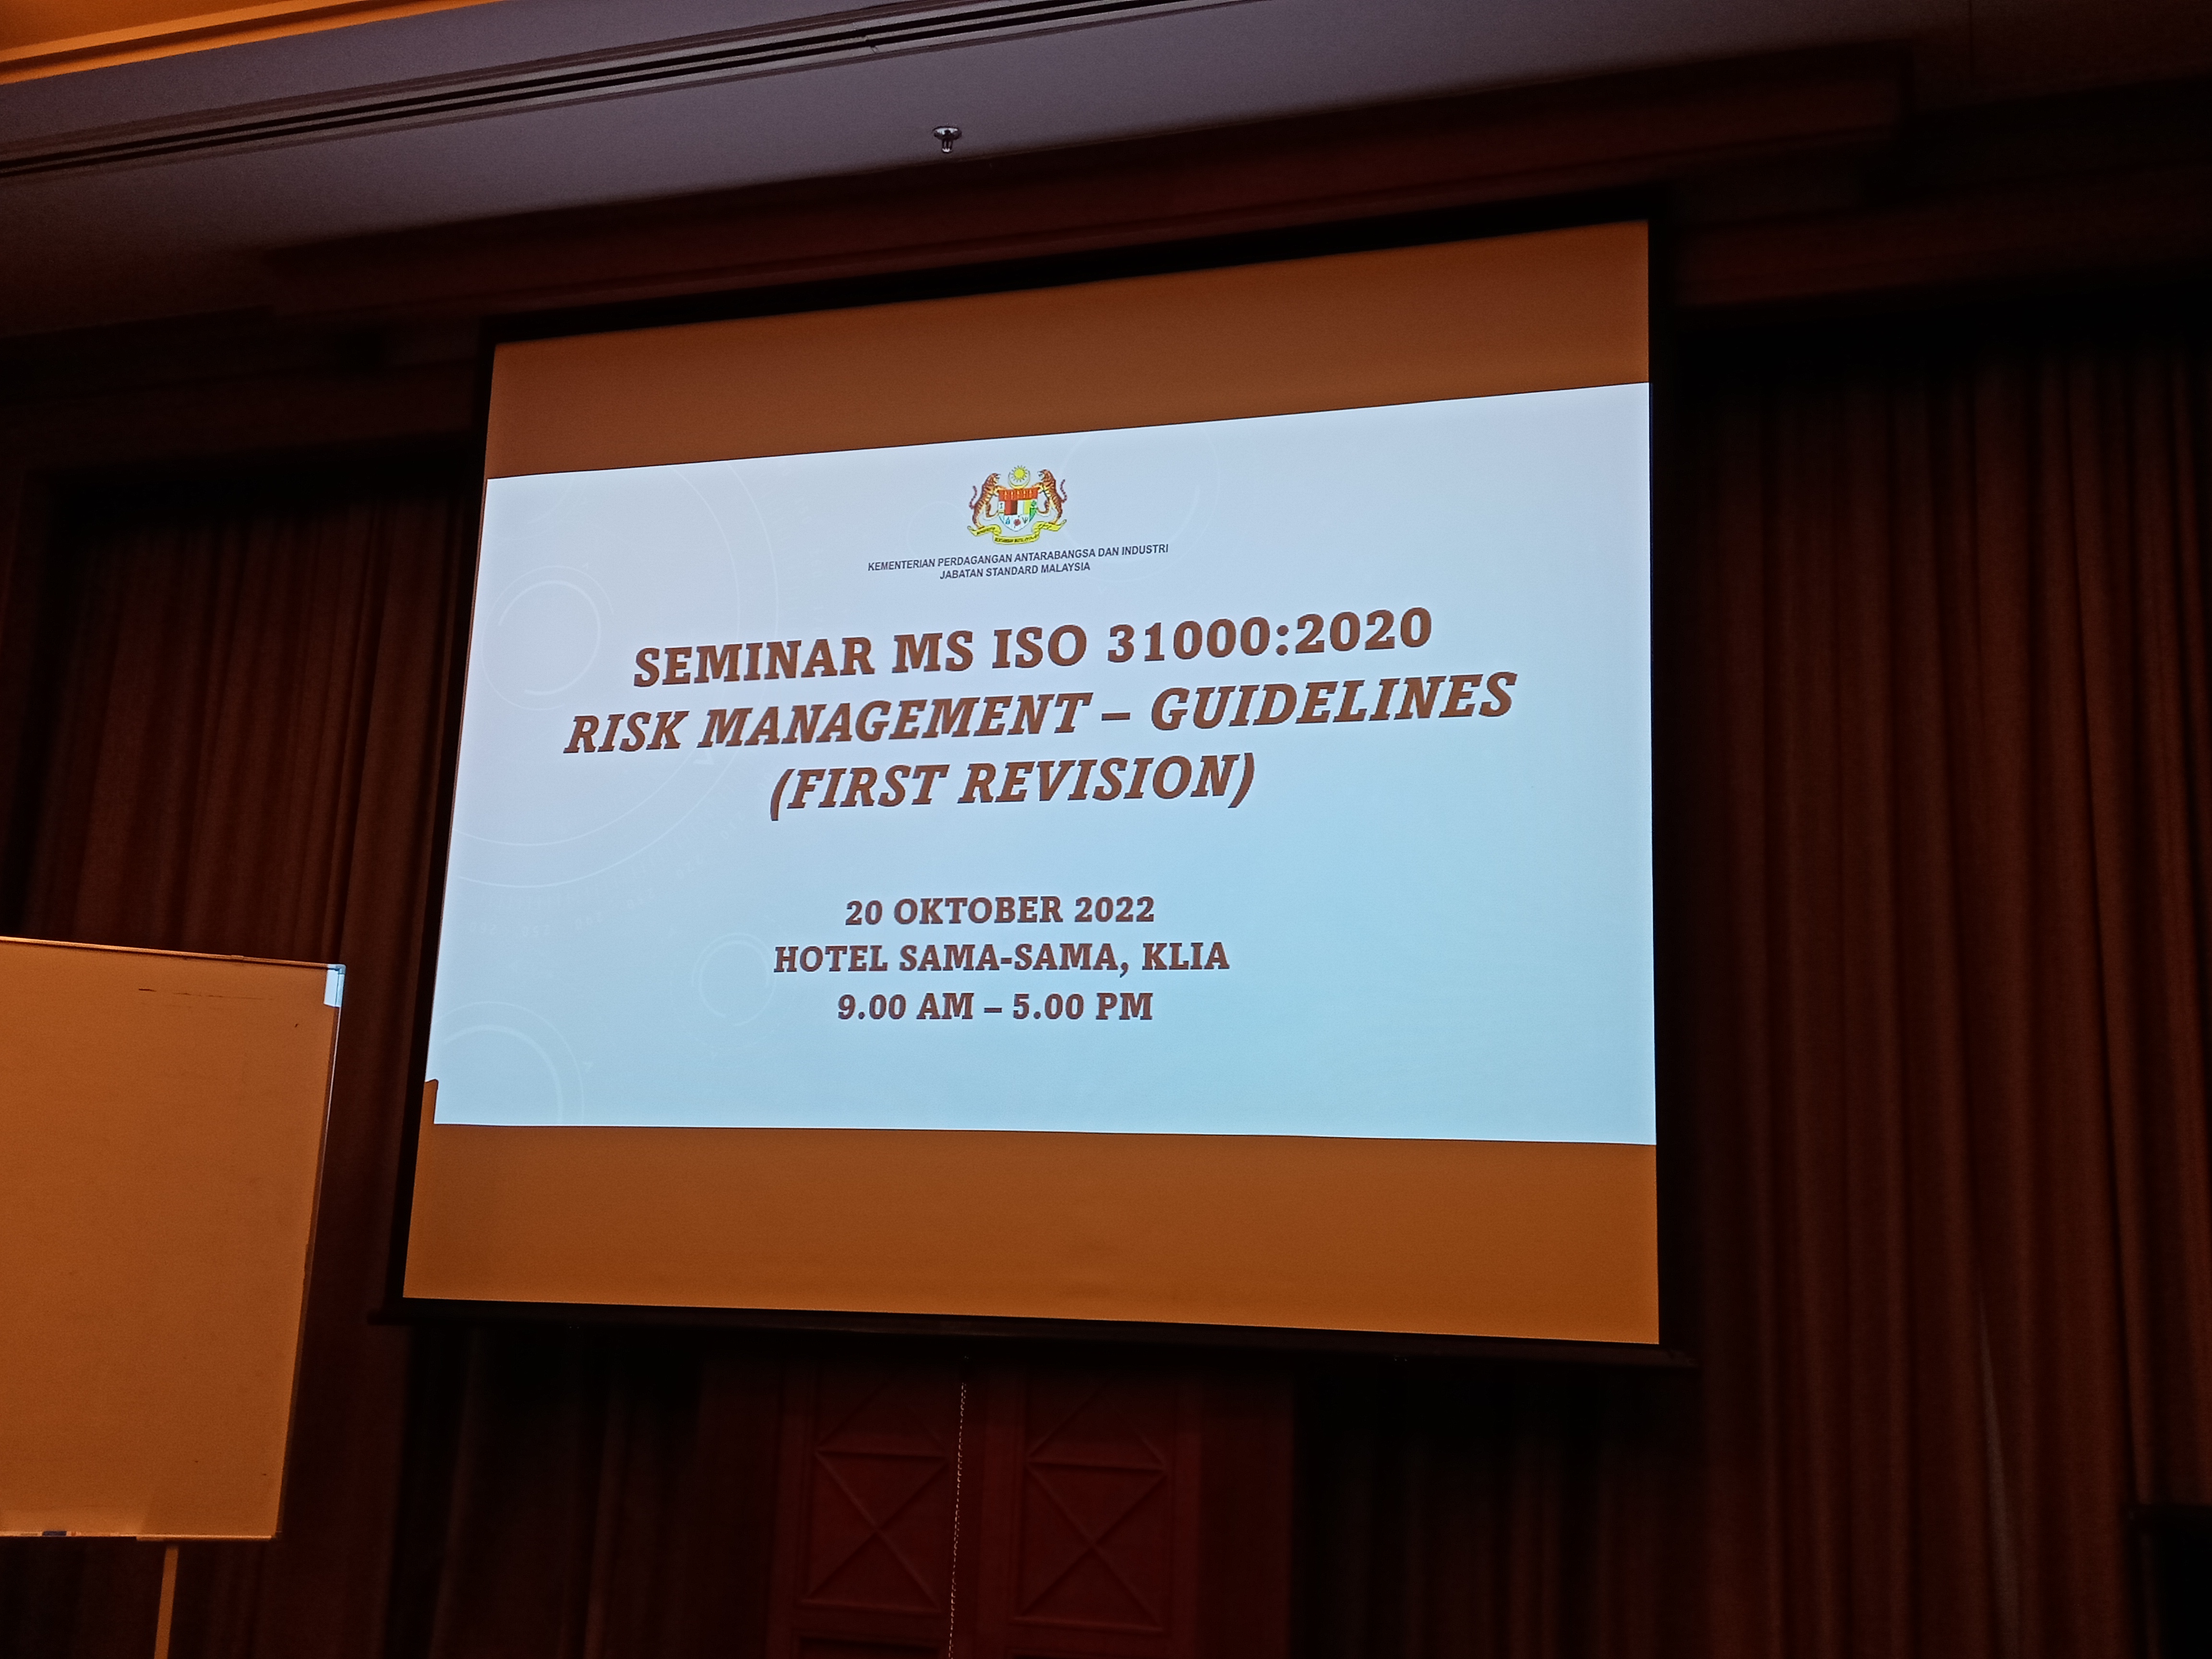 Seminar MS ISO 31000:2020 Risk Management - Guidelines (First Revision)